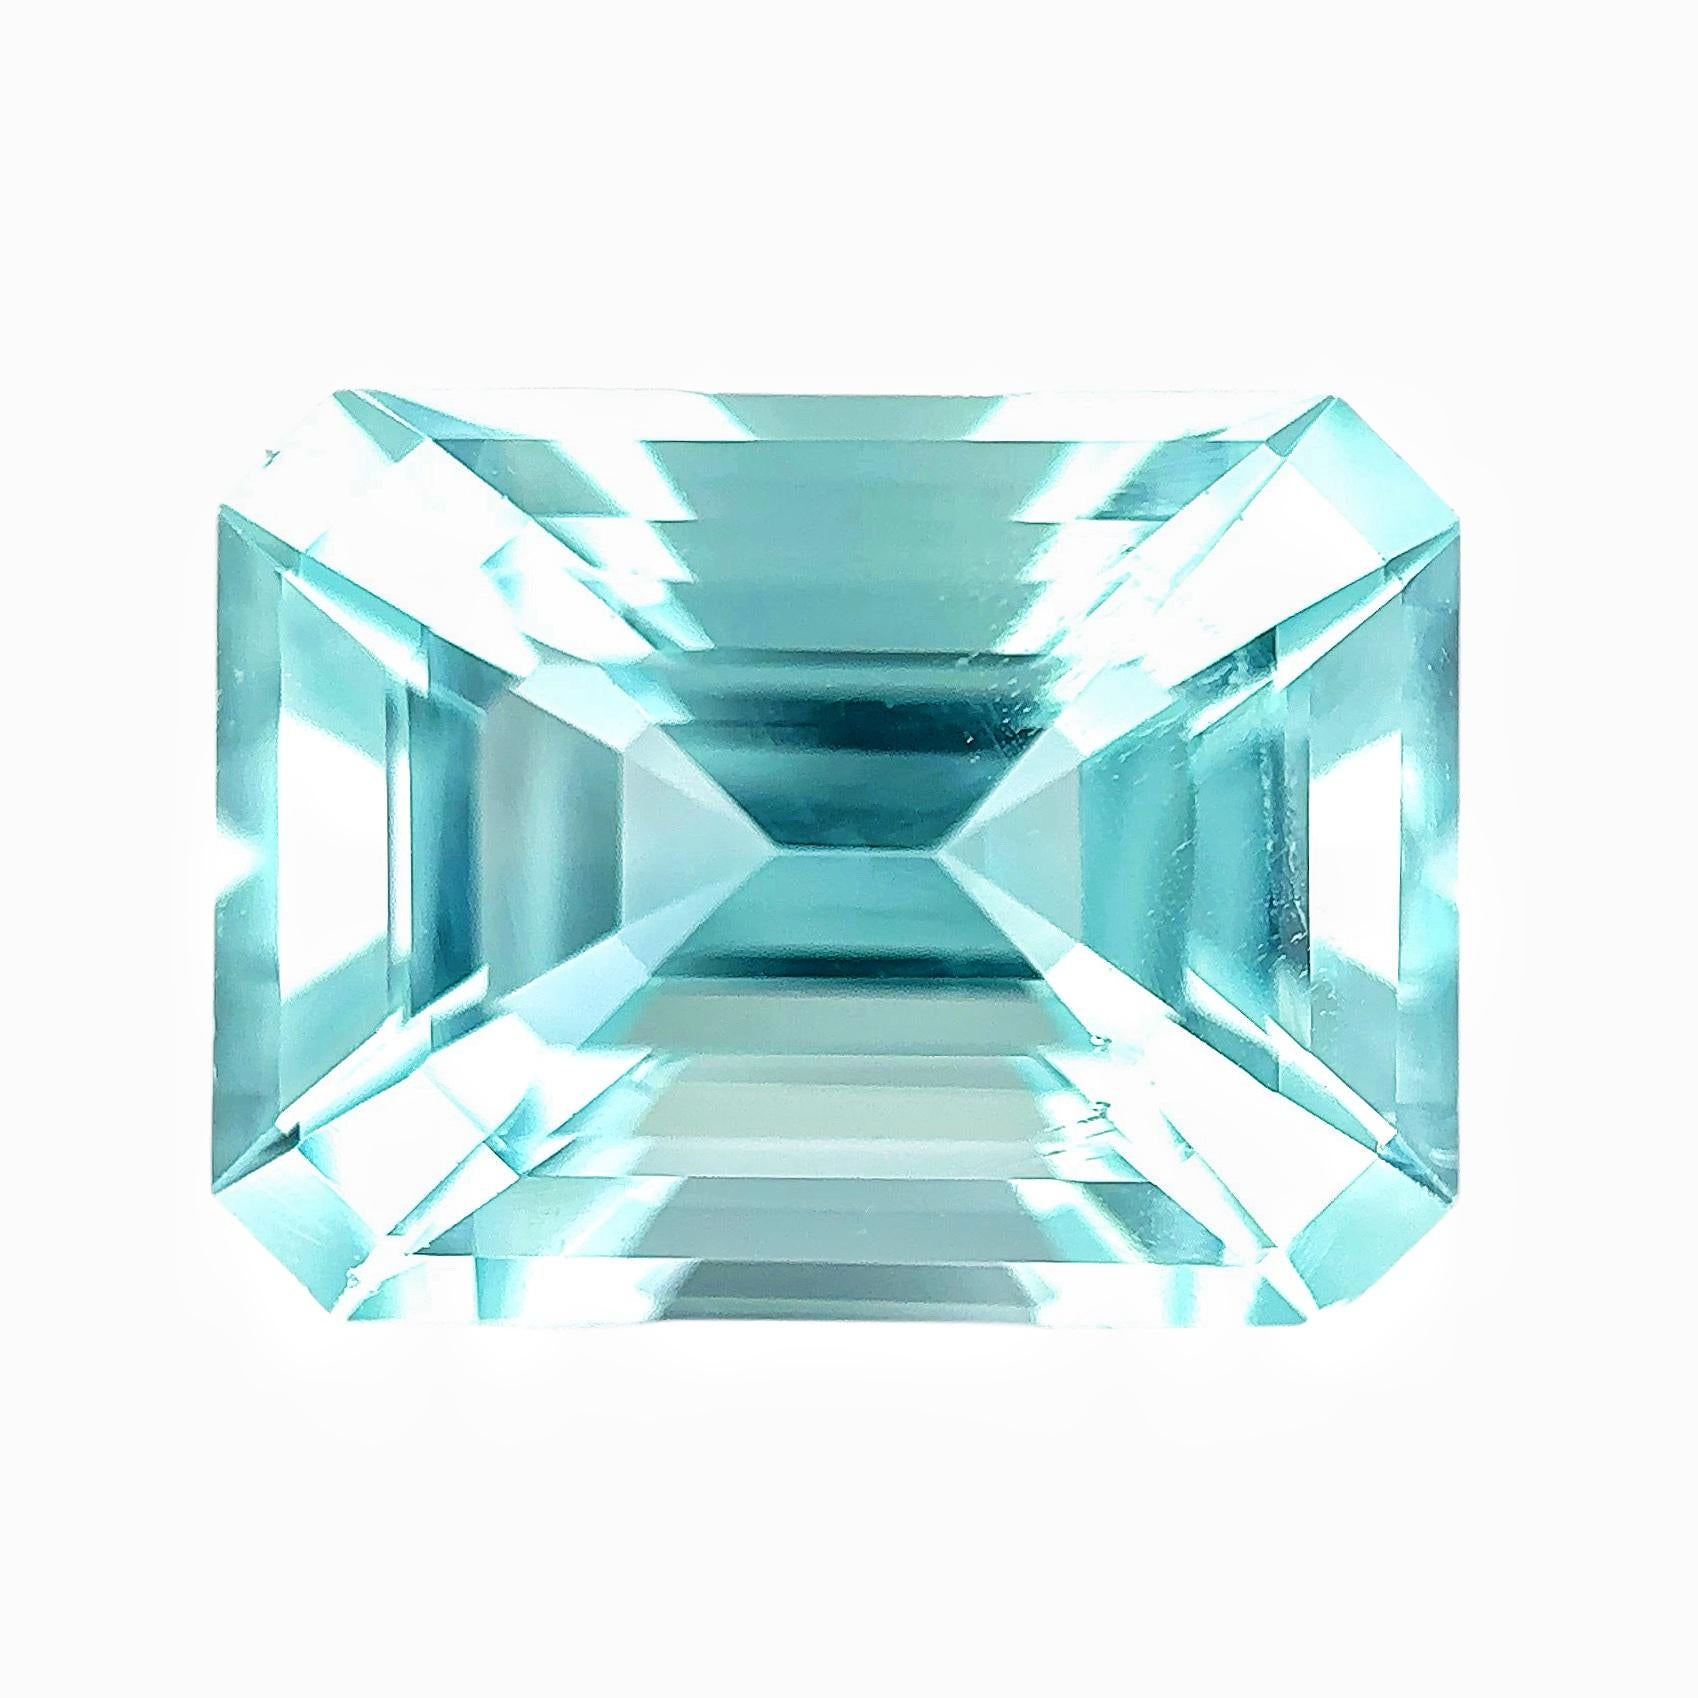 4.75 Carat Natural Aquamarine Loose Stone

Appointed lab certificate can be arranged upon request

This Item is ideal for your design as an engagement ring, cocktail ring, necklace, bracelet, etc.


ABOUT US

Xuelai Jewellery London is a